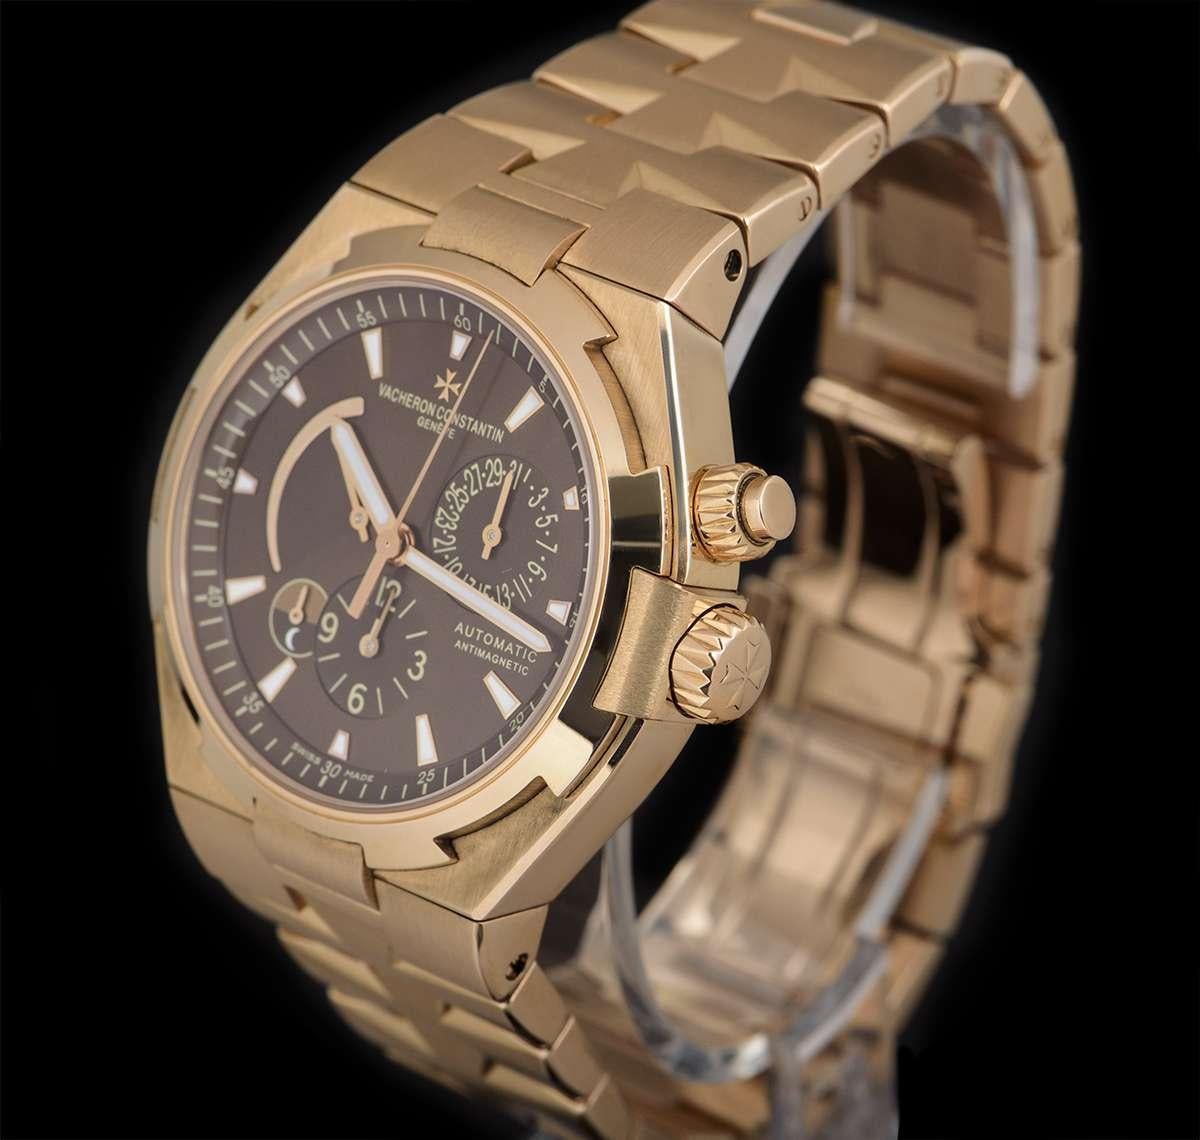 An 18k Rose Gold Overseas Gents Wristwatch, brown dial with applied hour markers, date sub-dial at 3 0'clock, second time zone at 6 0'clock, day/night indicator between 7 & 8 0'clock, power reserve indicator between 8 & 11 0'clock, a fixed 18k rose